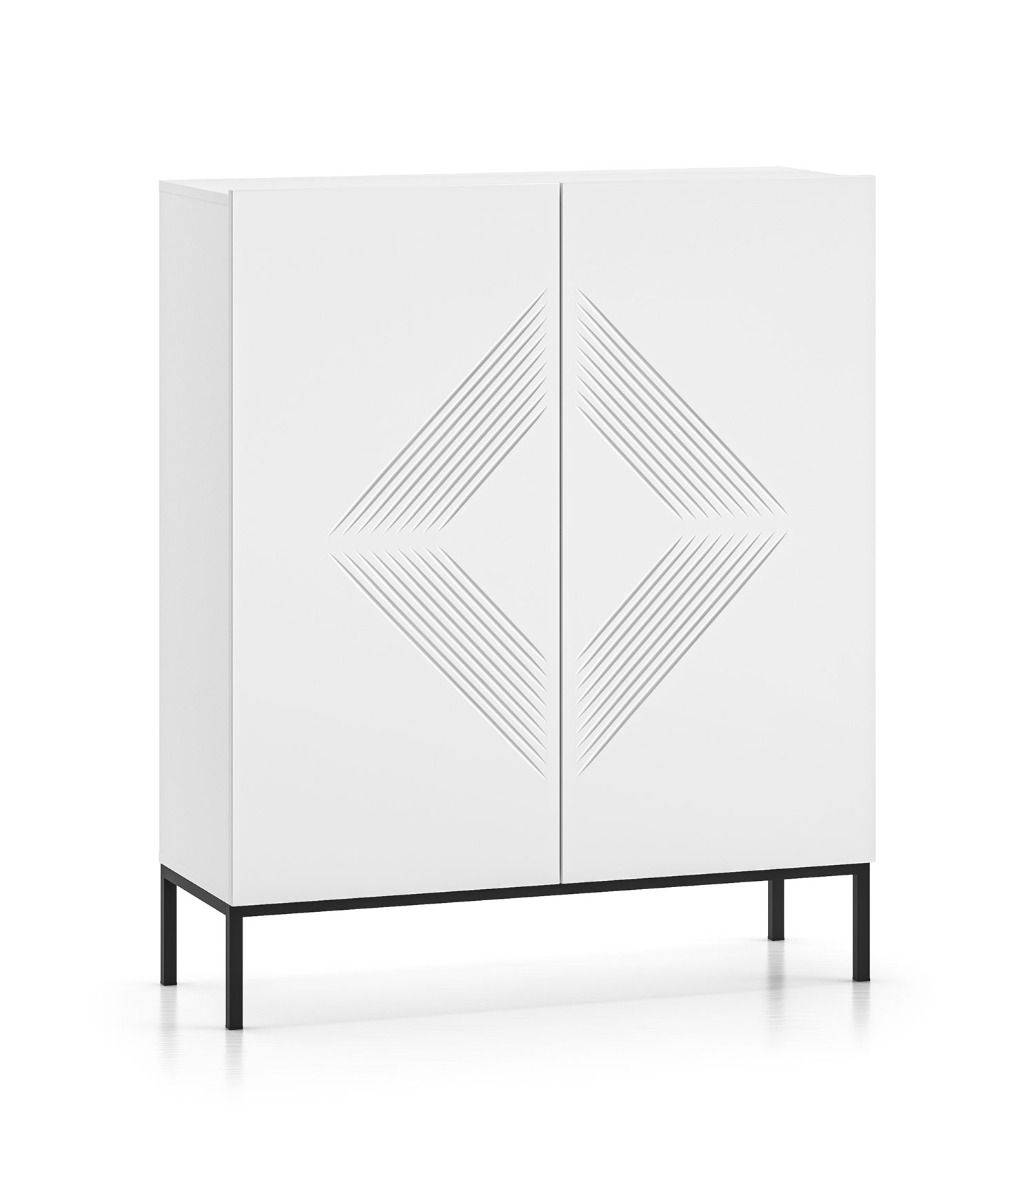 Robust chest of drawers with Taos 03 metal legs, color: white matt, dimensions: 120 x 100 x 37 cm, with 2 doors and three compartments, modern and simple design